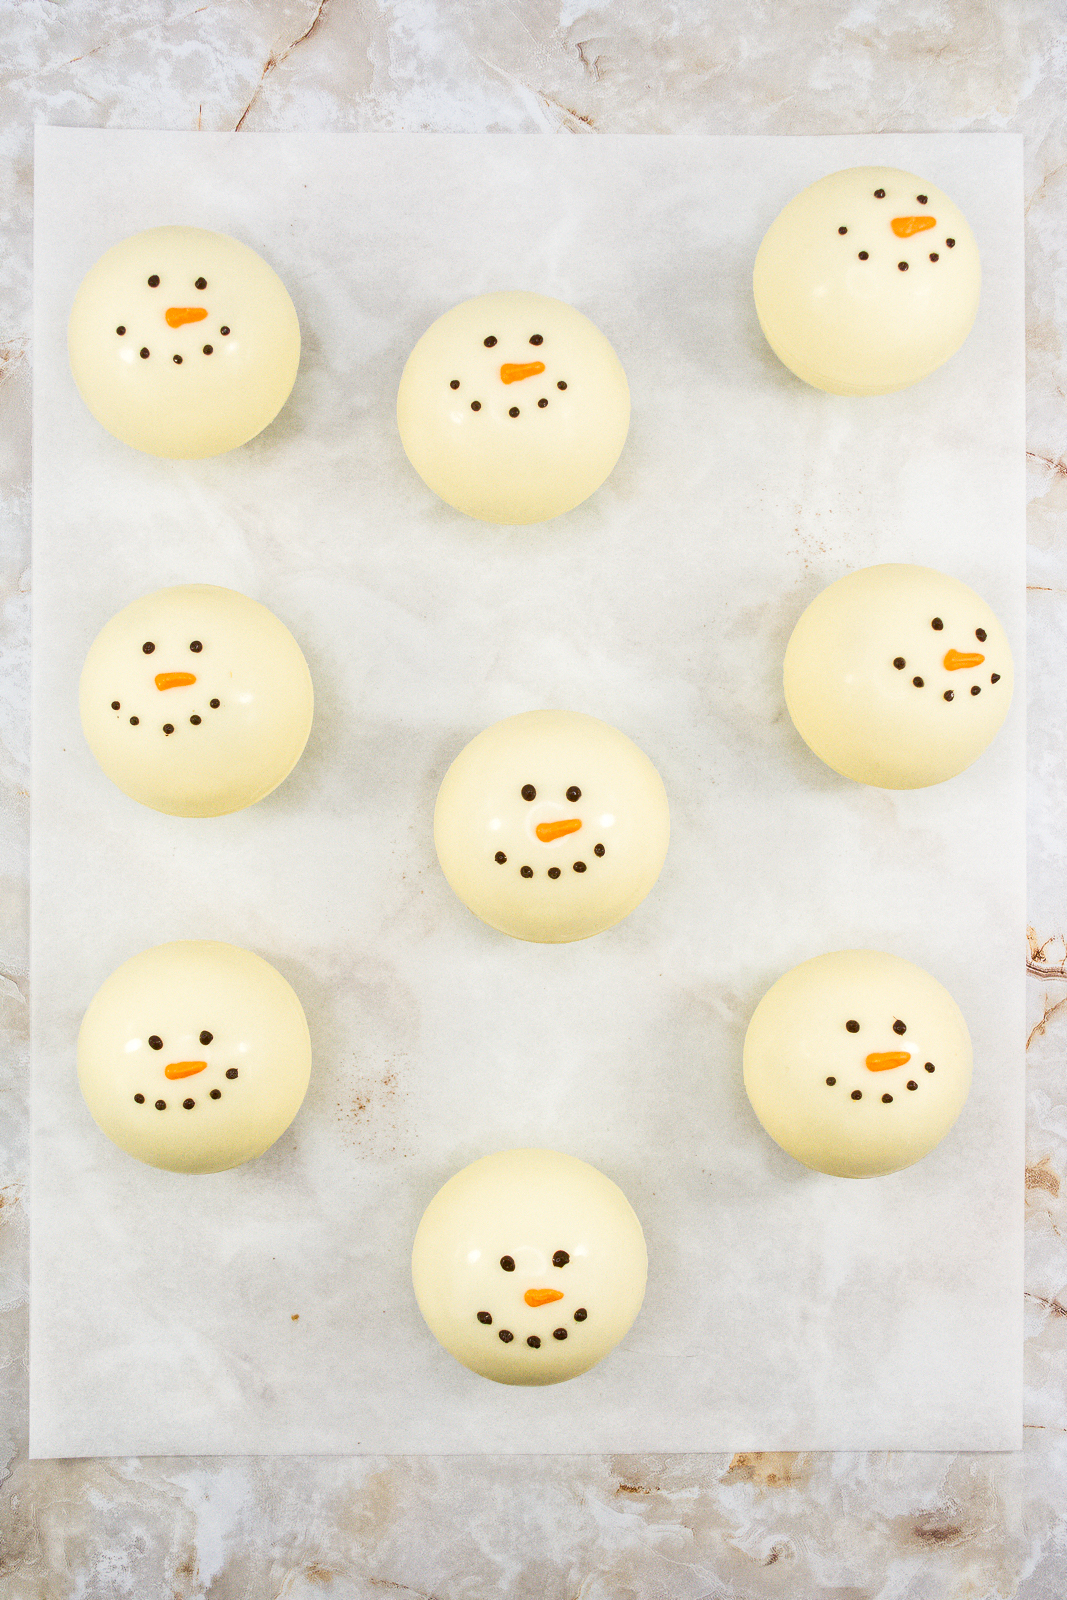 Nine white chocolate cocoa bombs decorated with eyes and a smile.